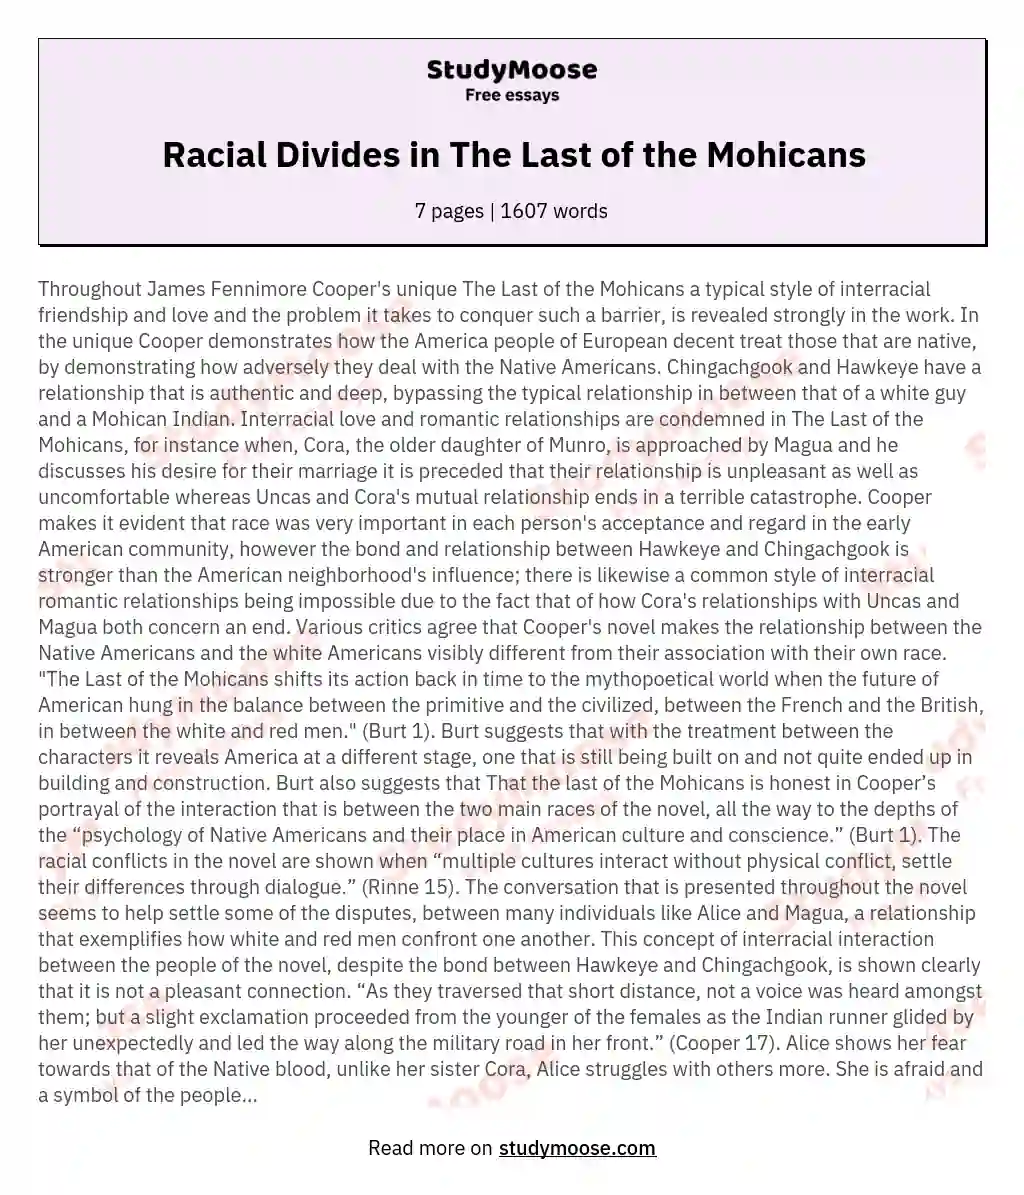 Racial Divides in The Last of the Mohicans